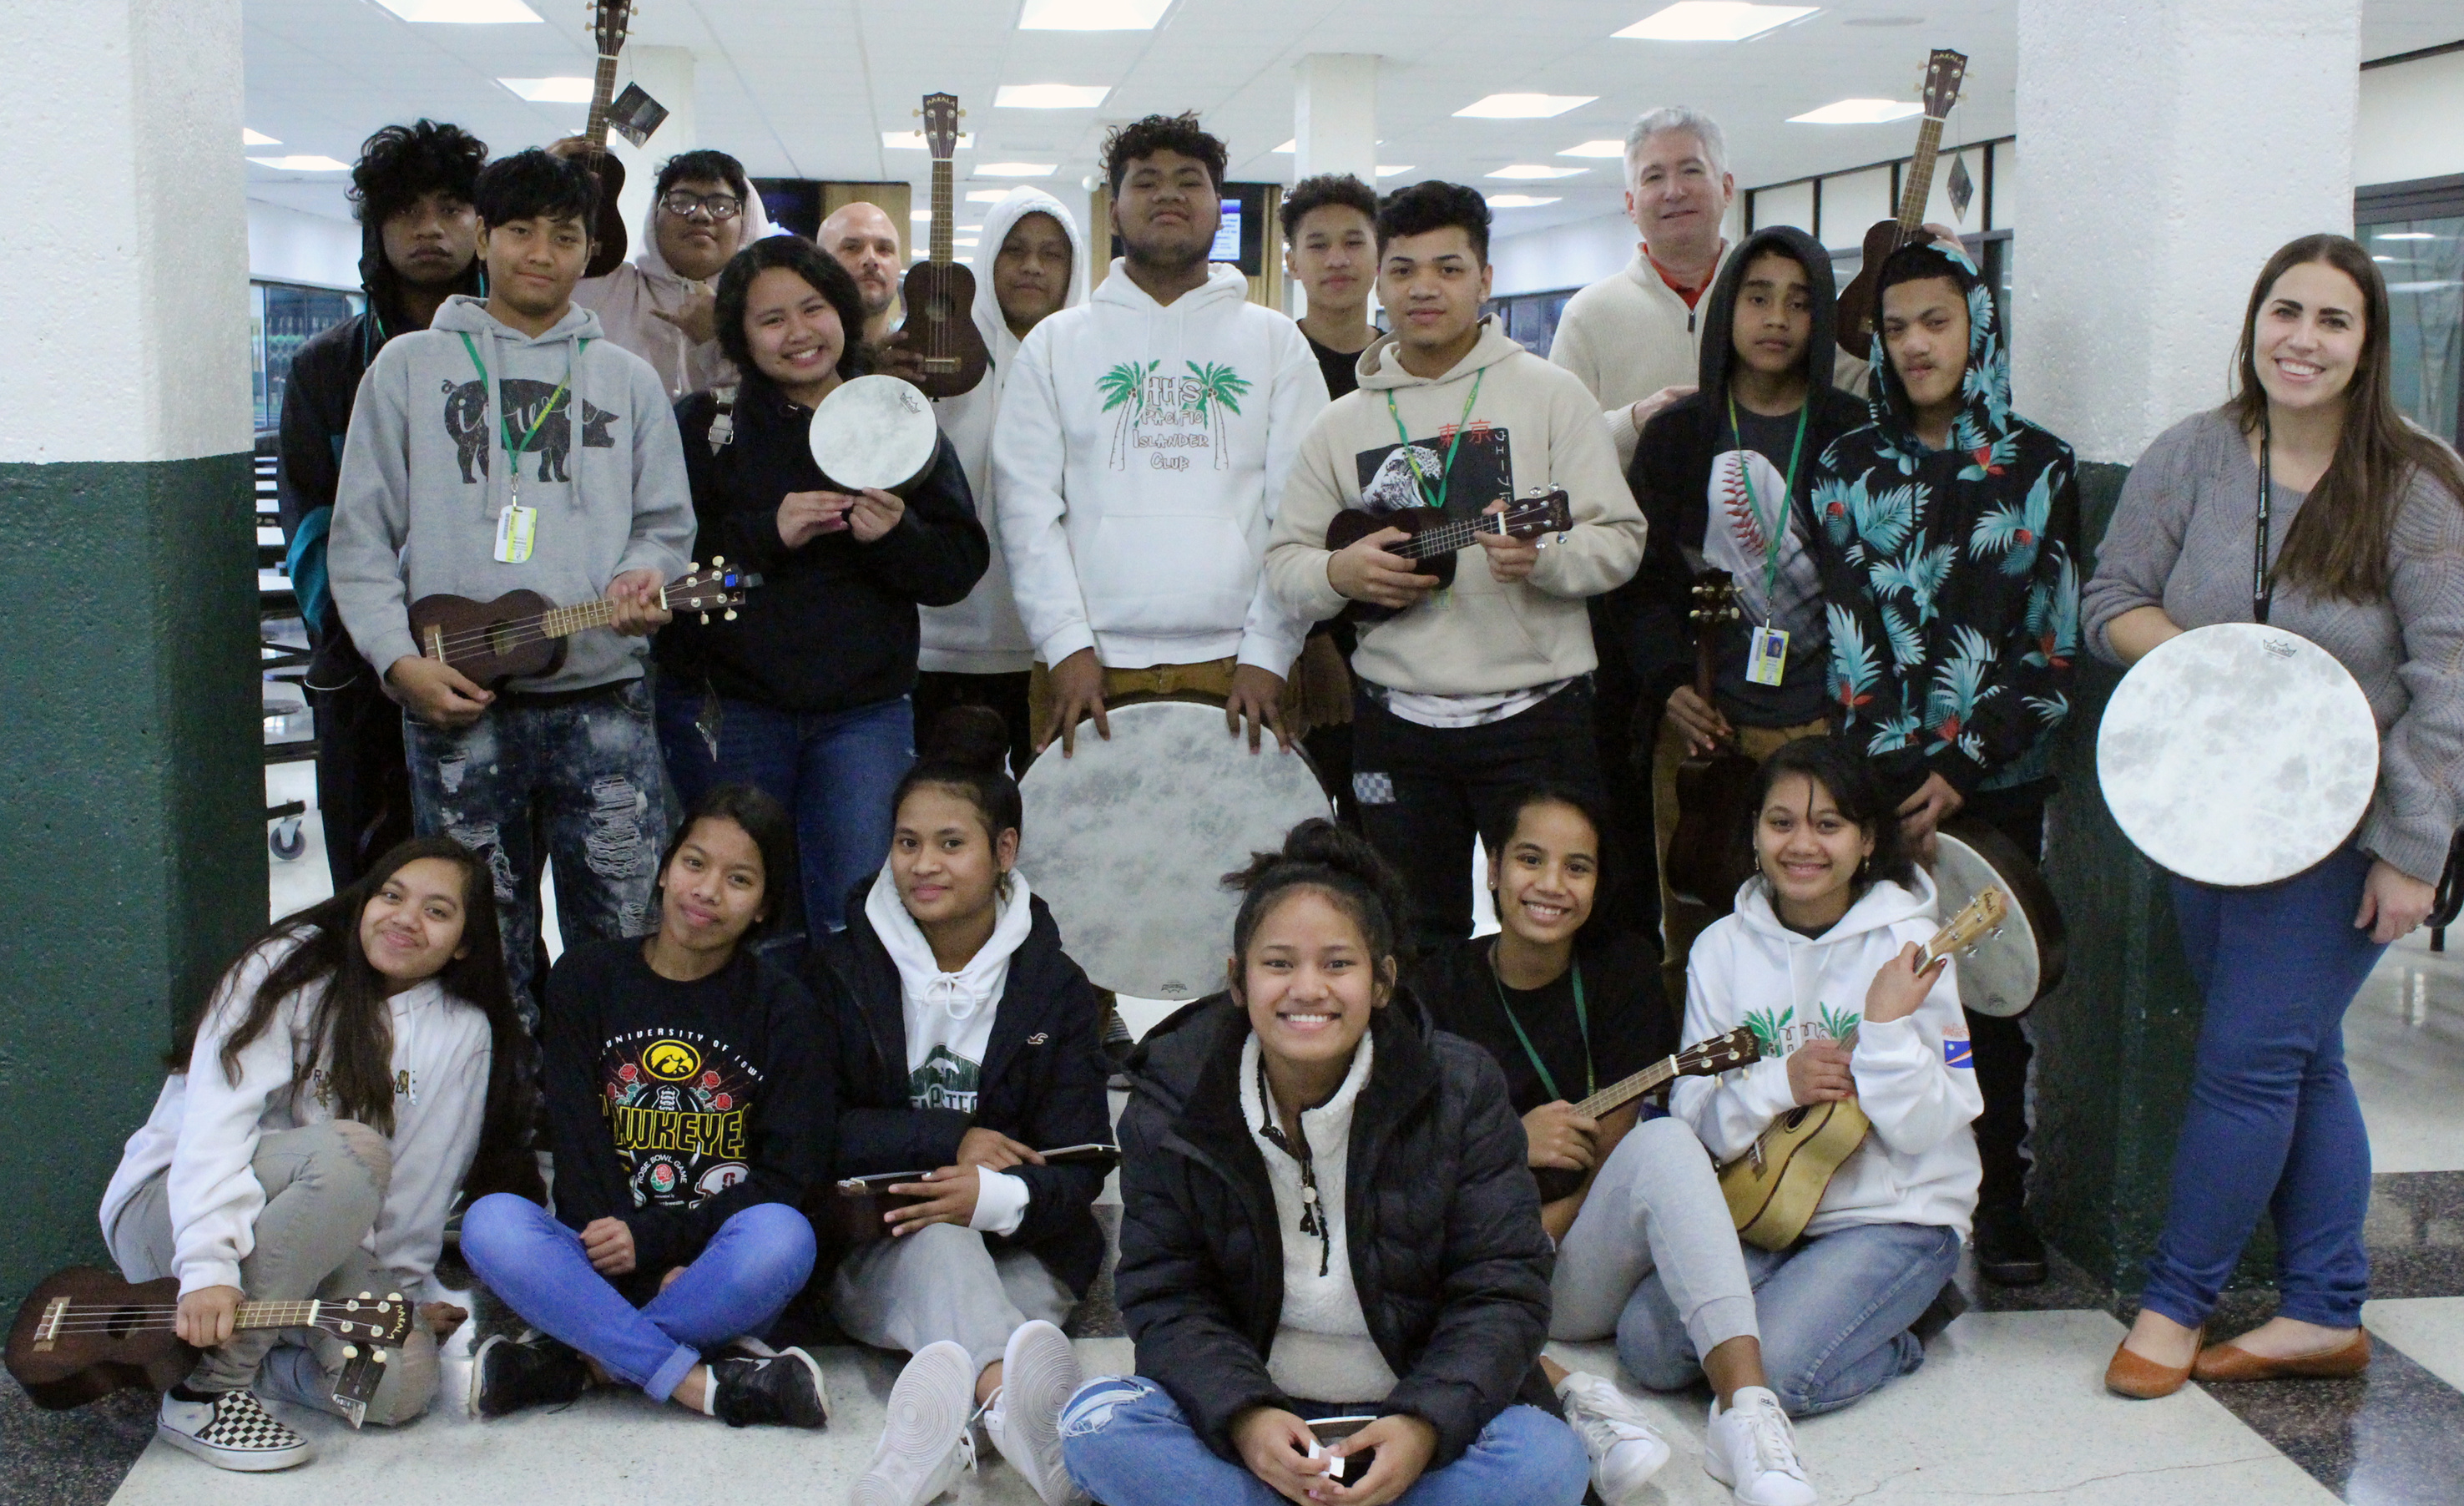 A large group of students pose in the hallway of a school with lockers around them. They are smiling and several are holding musical instruments.